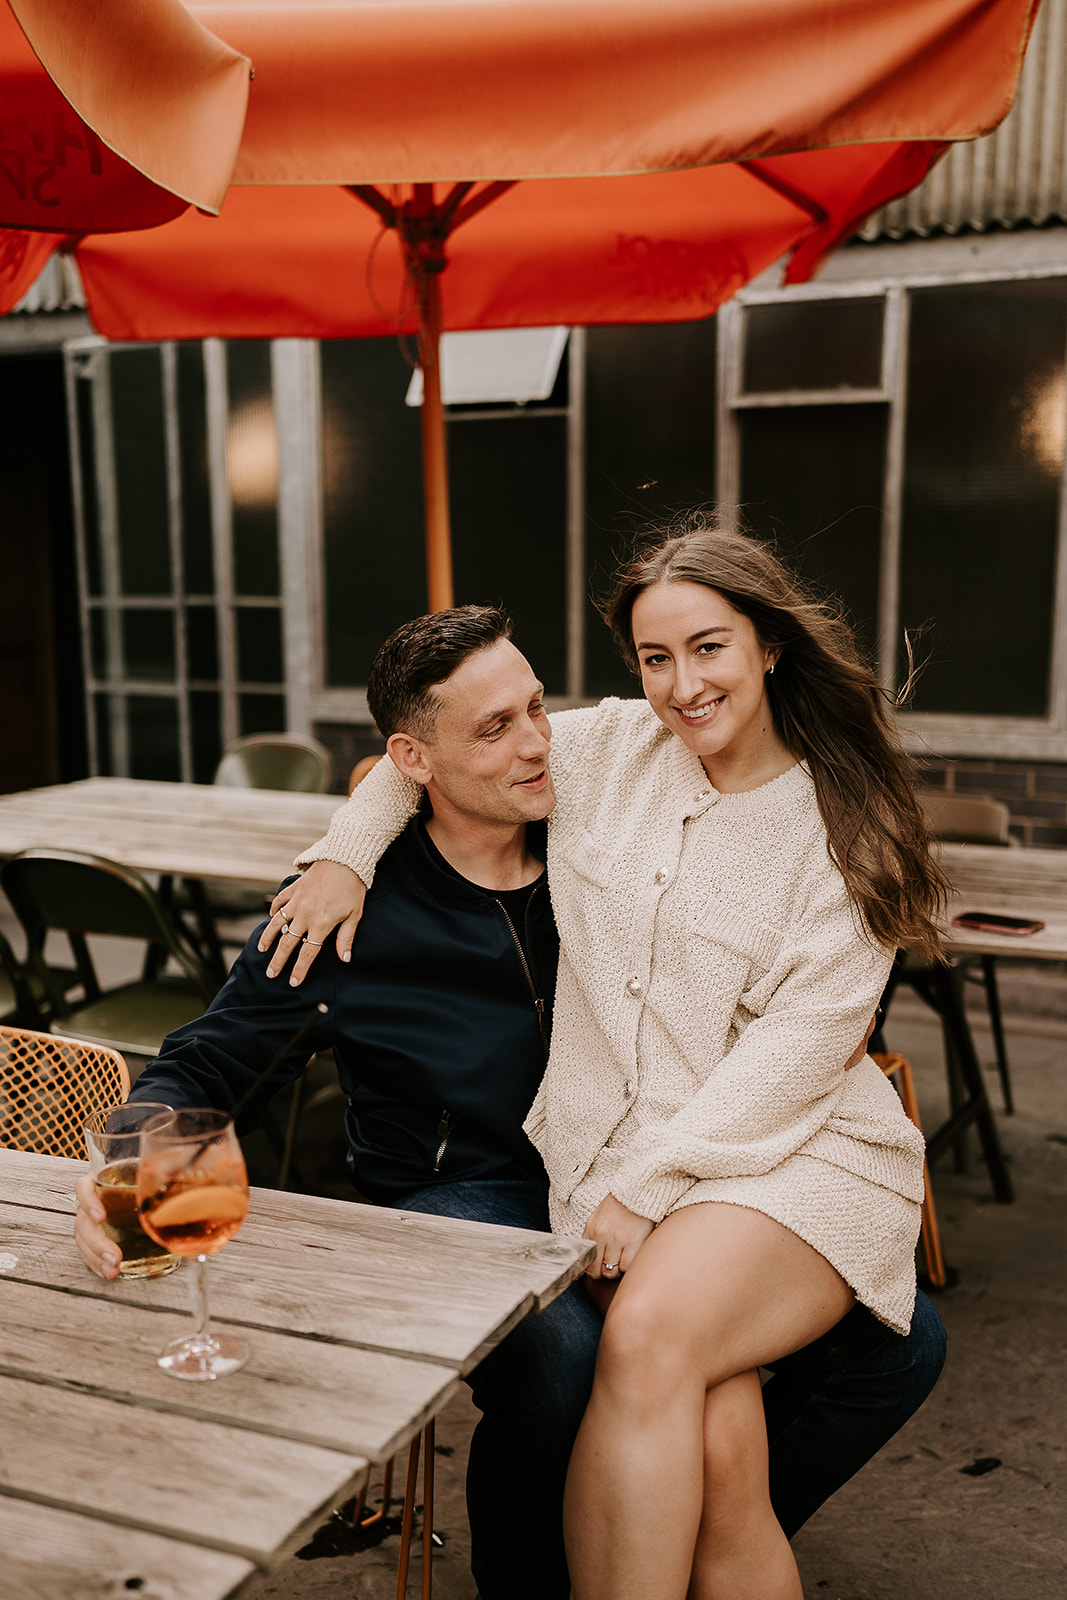 Urban Engagement Shoot on the Roof Terrace at The Mowbray, Sheffield